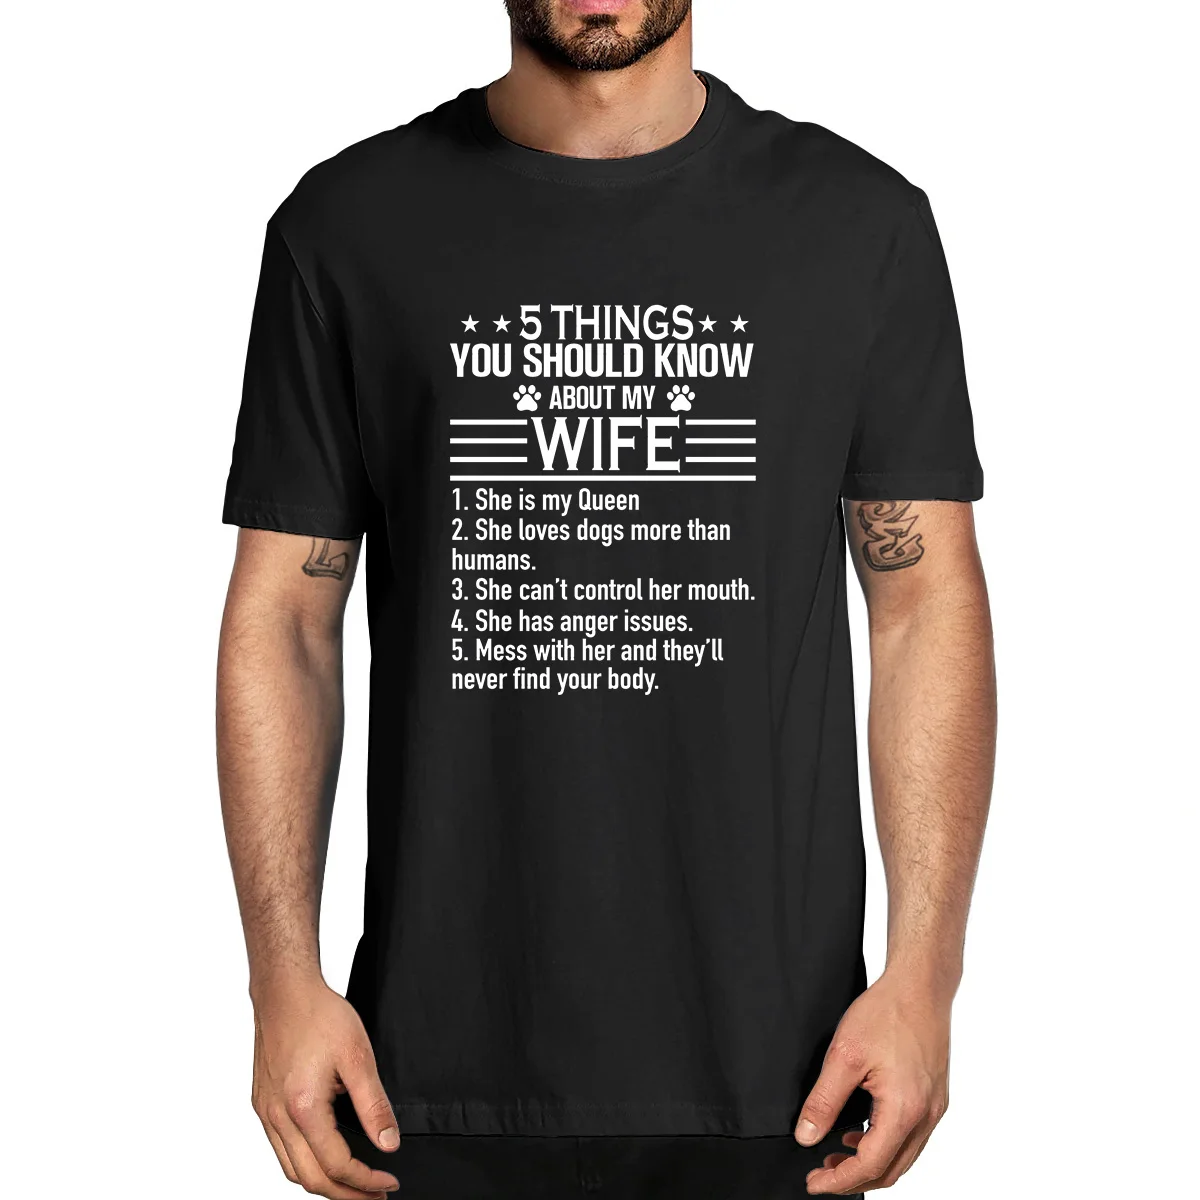 

100% Cotton 5 Things You Should Know About Wife To Husband Funny Sayings Summer Men Novelty T-Shirt EU Size Women Streetwear Tee